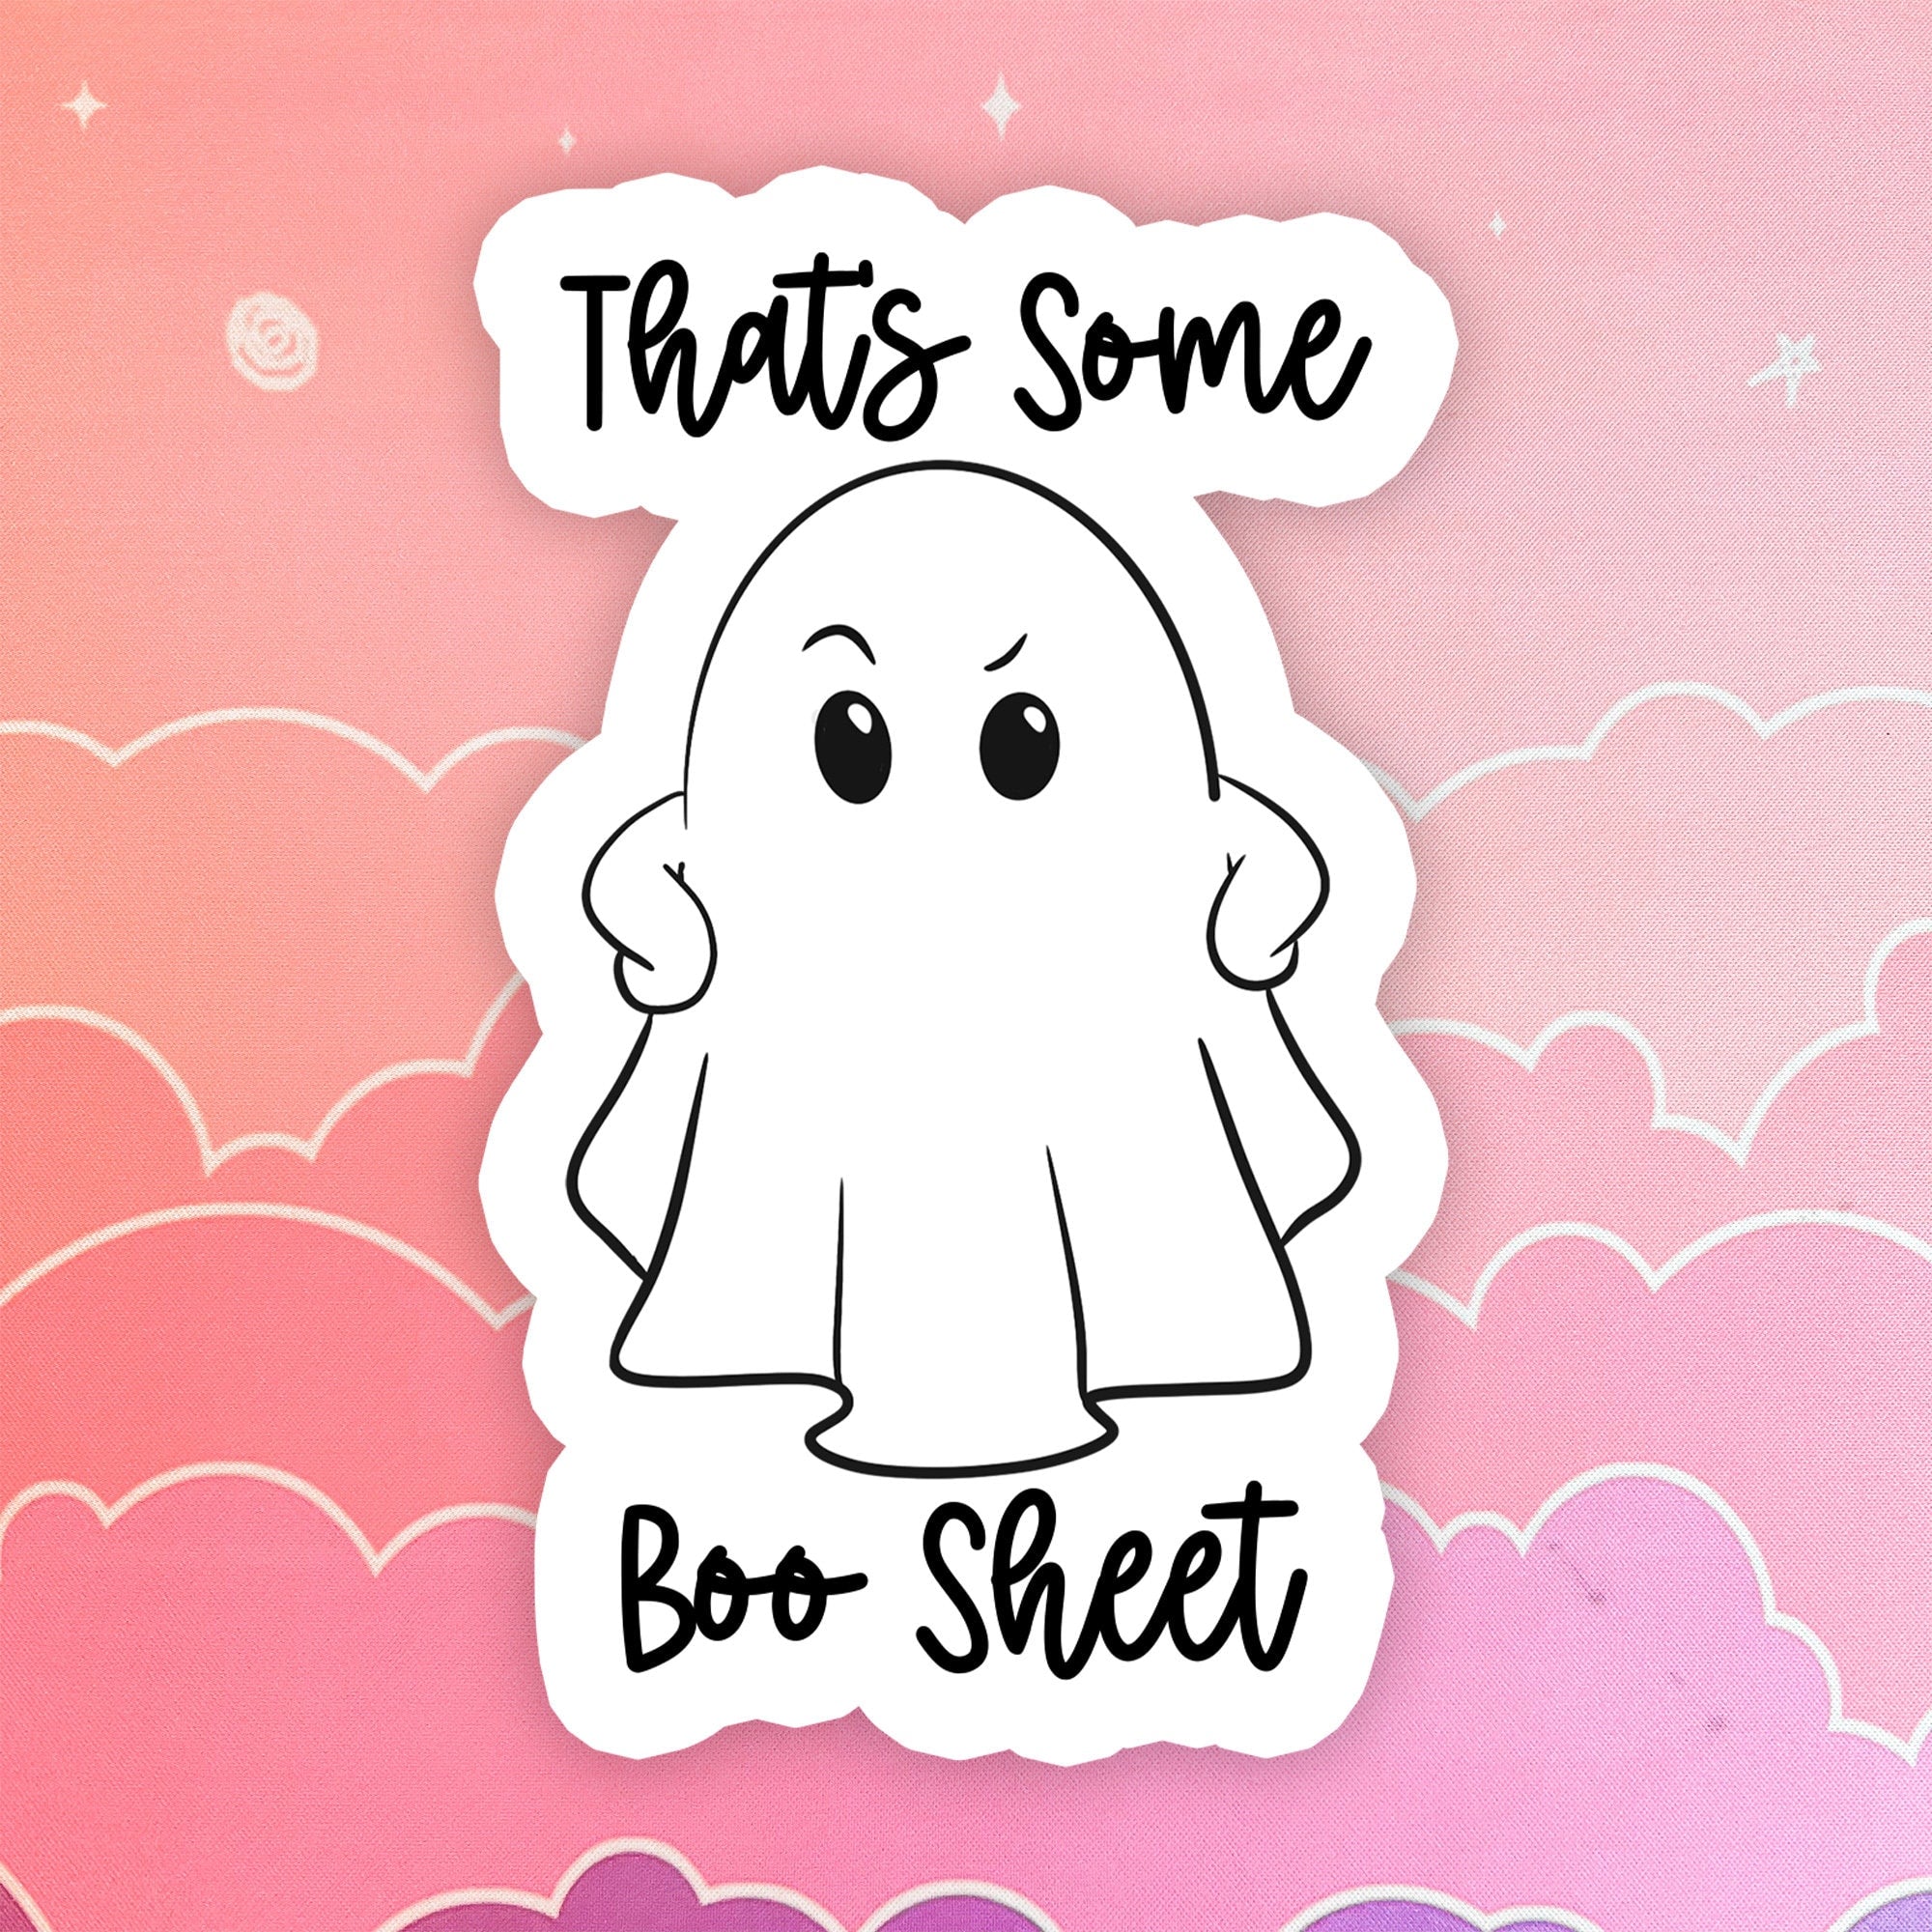 Funny Ghost sticker, Halloween stickers, spooky season, boo sheet, funny Halloween quotes, cute ghost, punny stickers, water bottle stickers